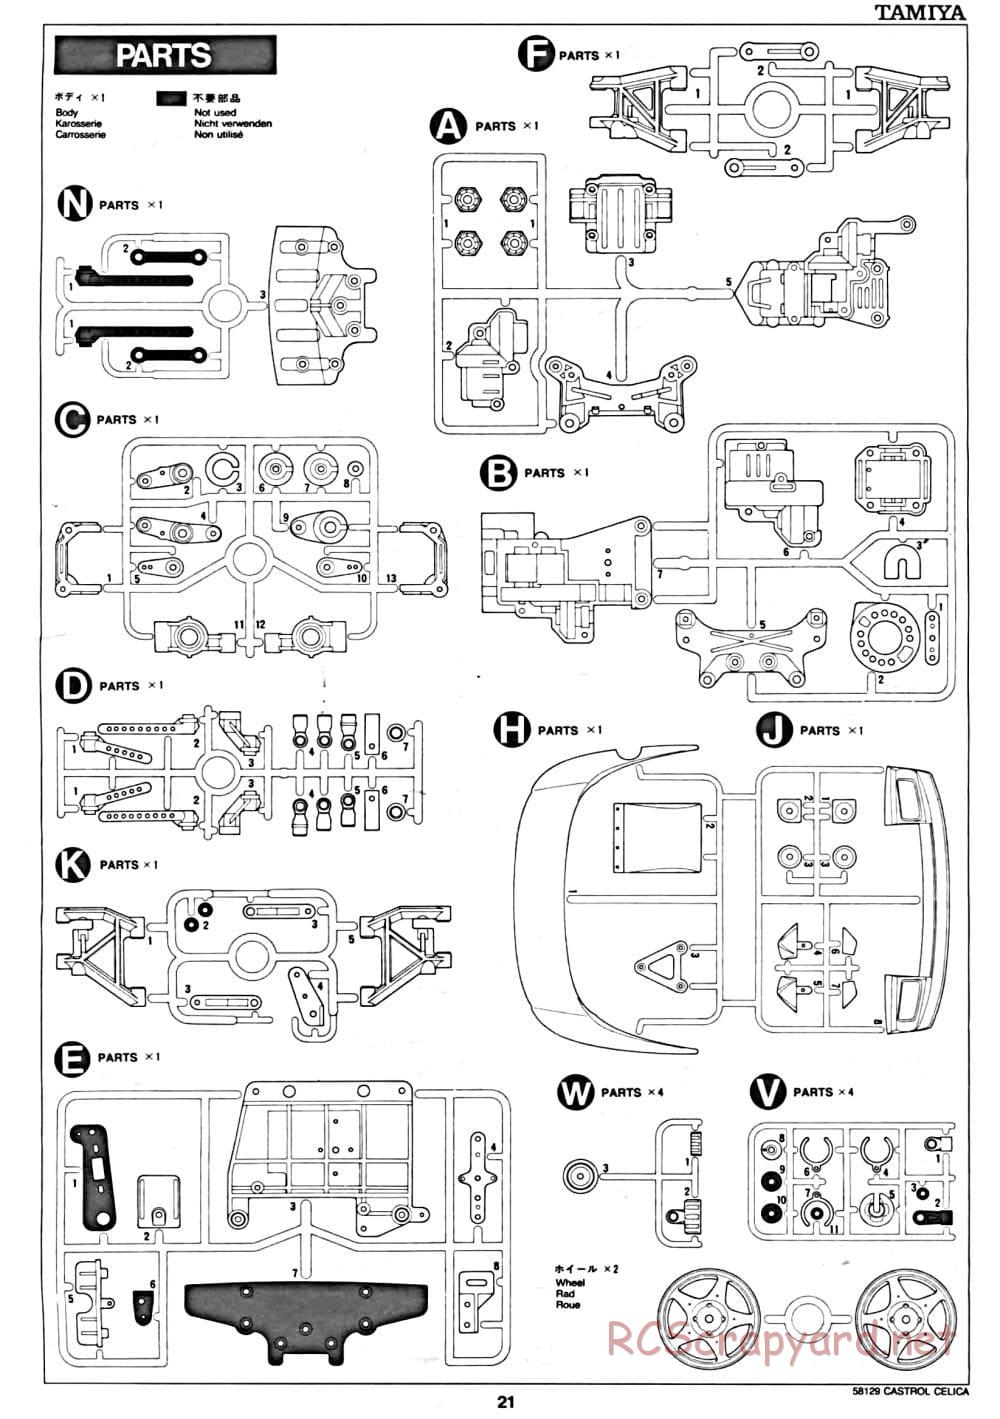 Tamiya - Castrol Celica 93 Monte-Carlo - TA-02 Chassis - Manual - Page 21